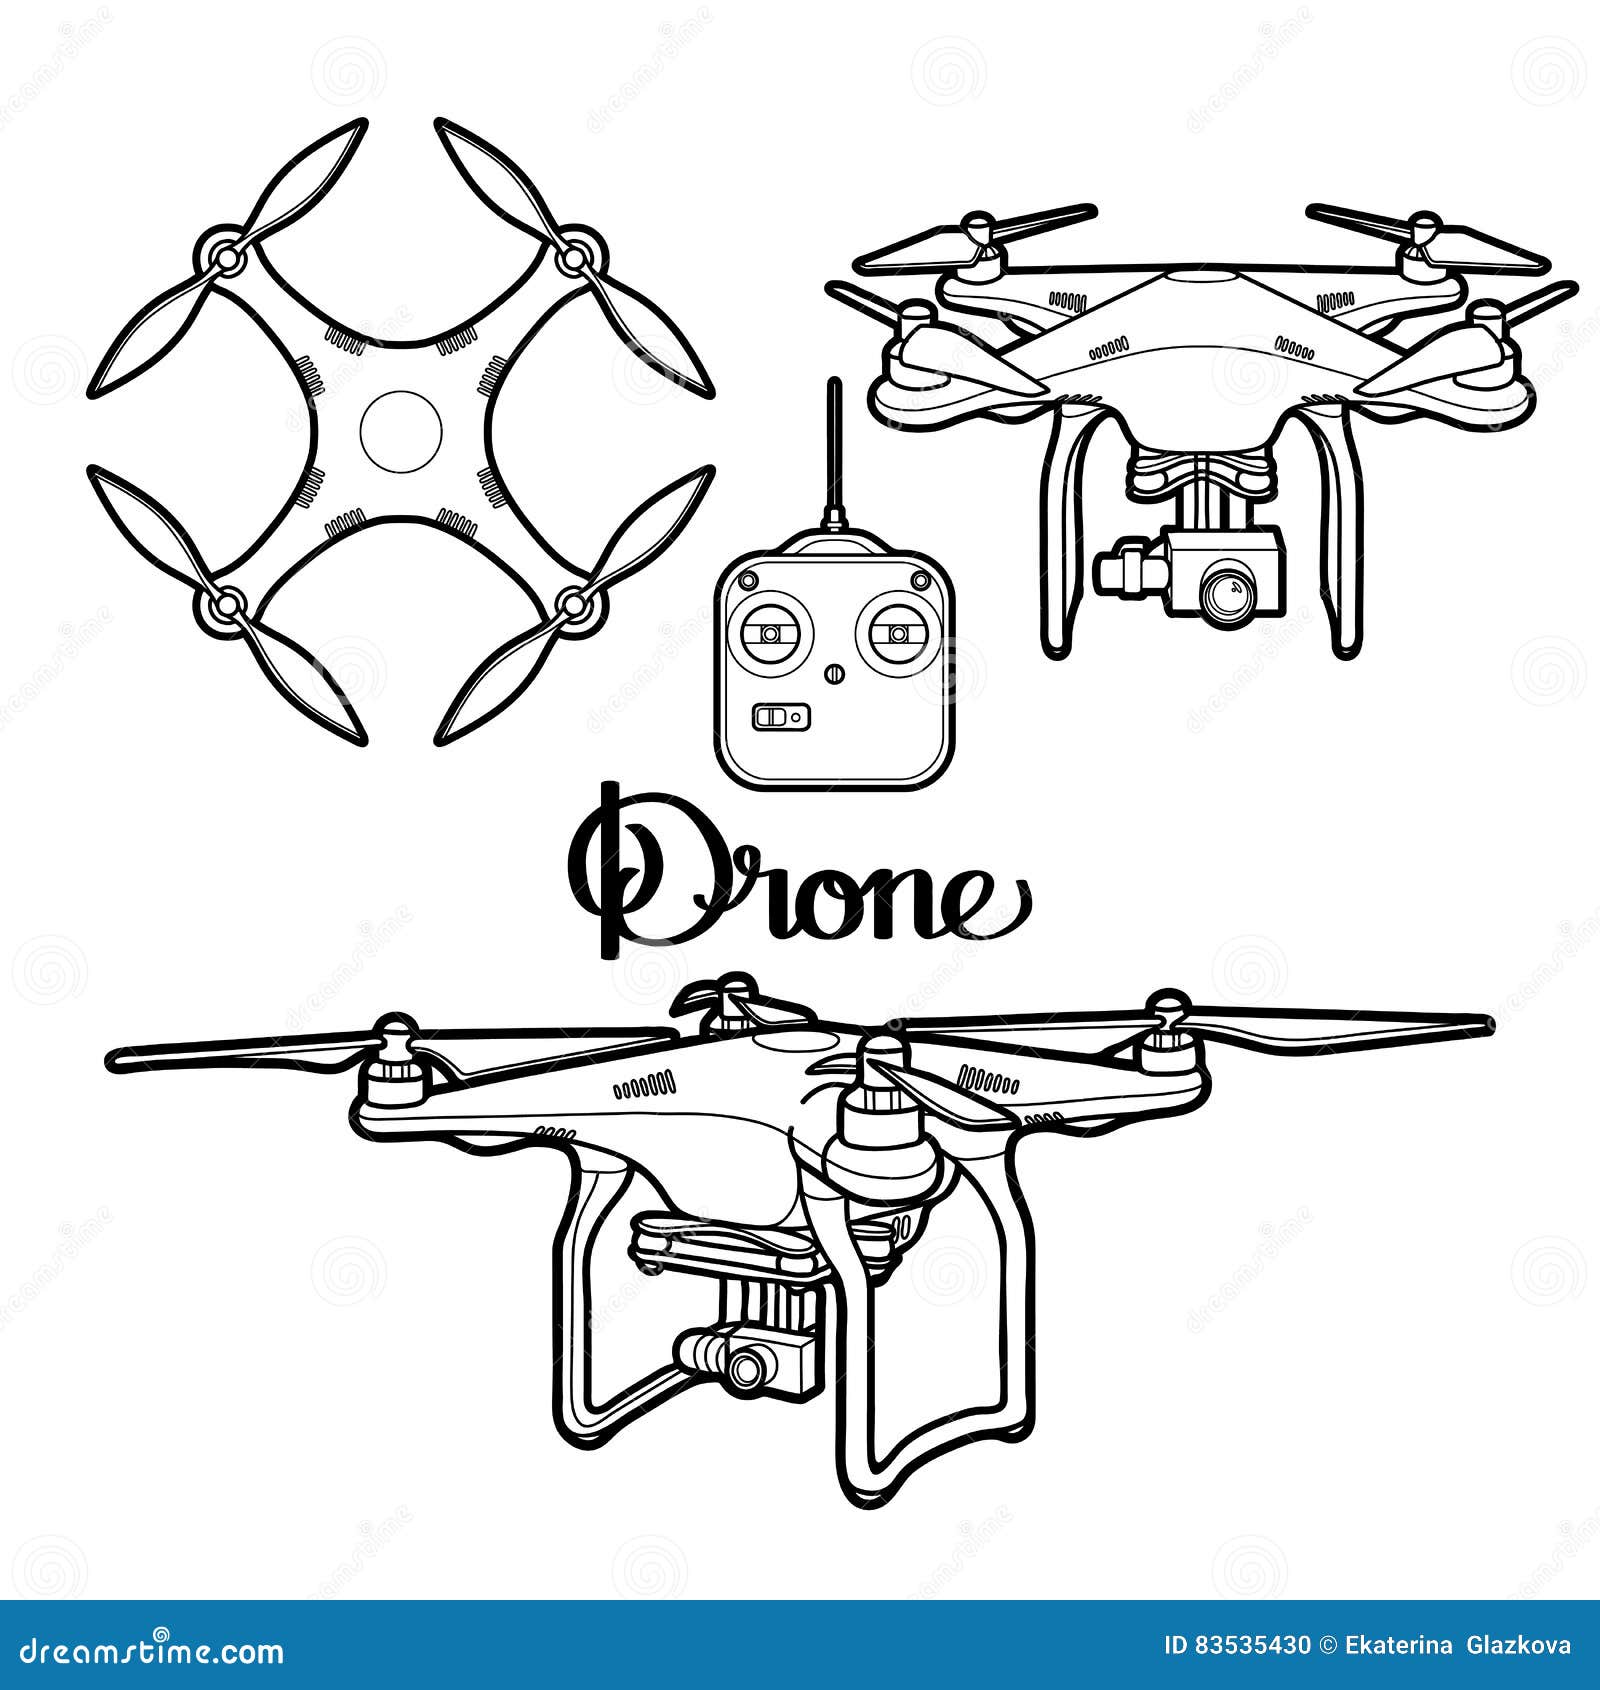 Graphic collection of drones stock vector